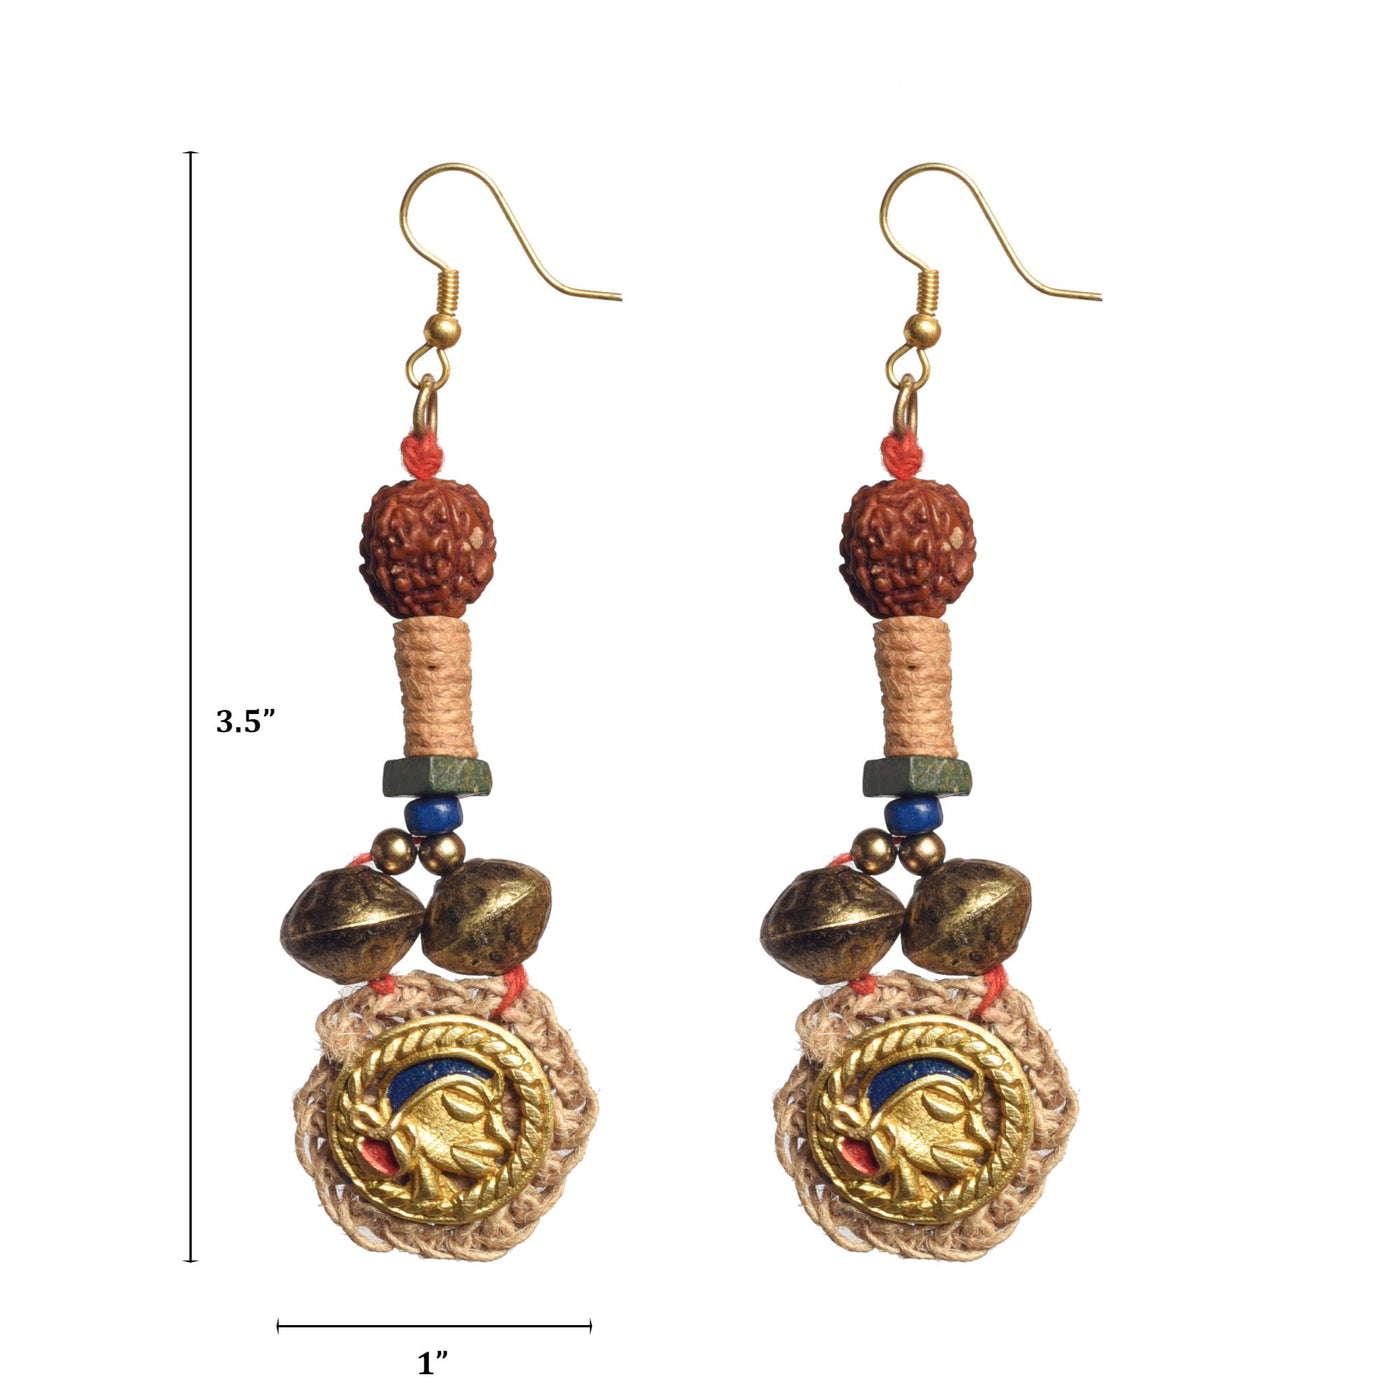 The Noble Handcrafted Tribal Earrings - Fashion & Lifestyle - 5